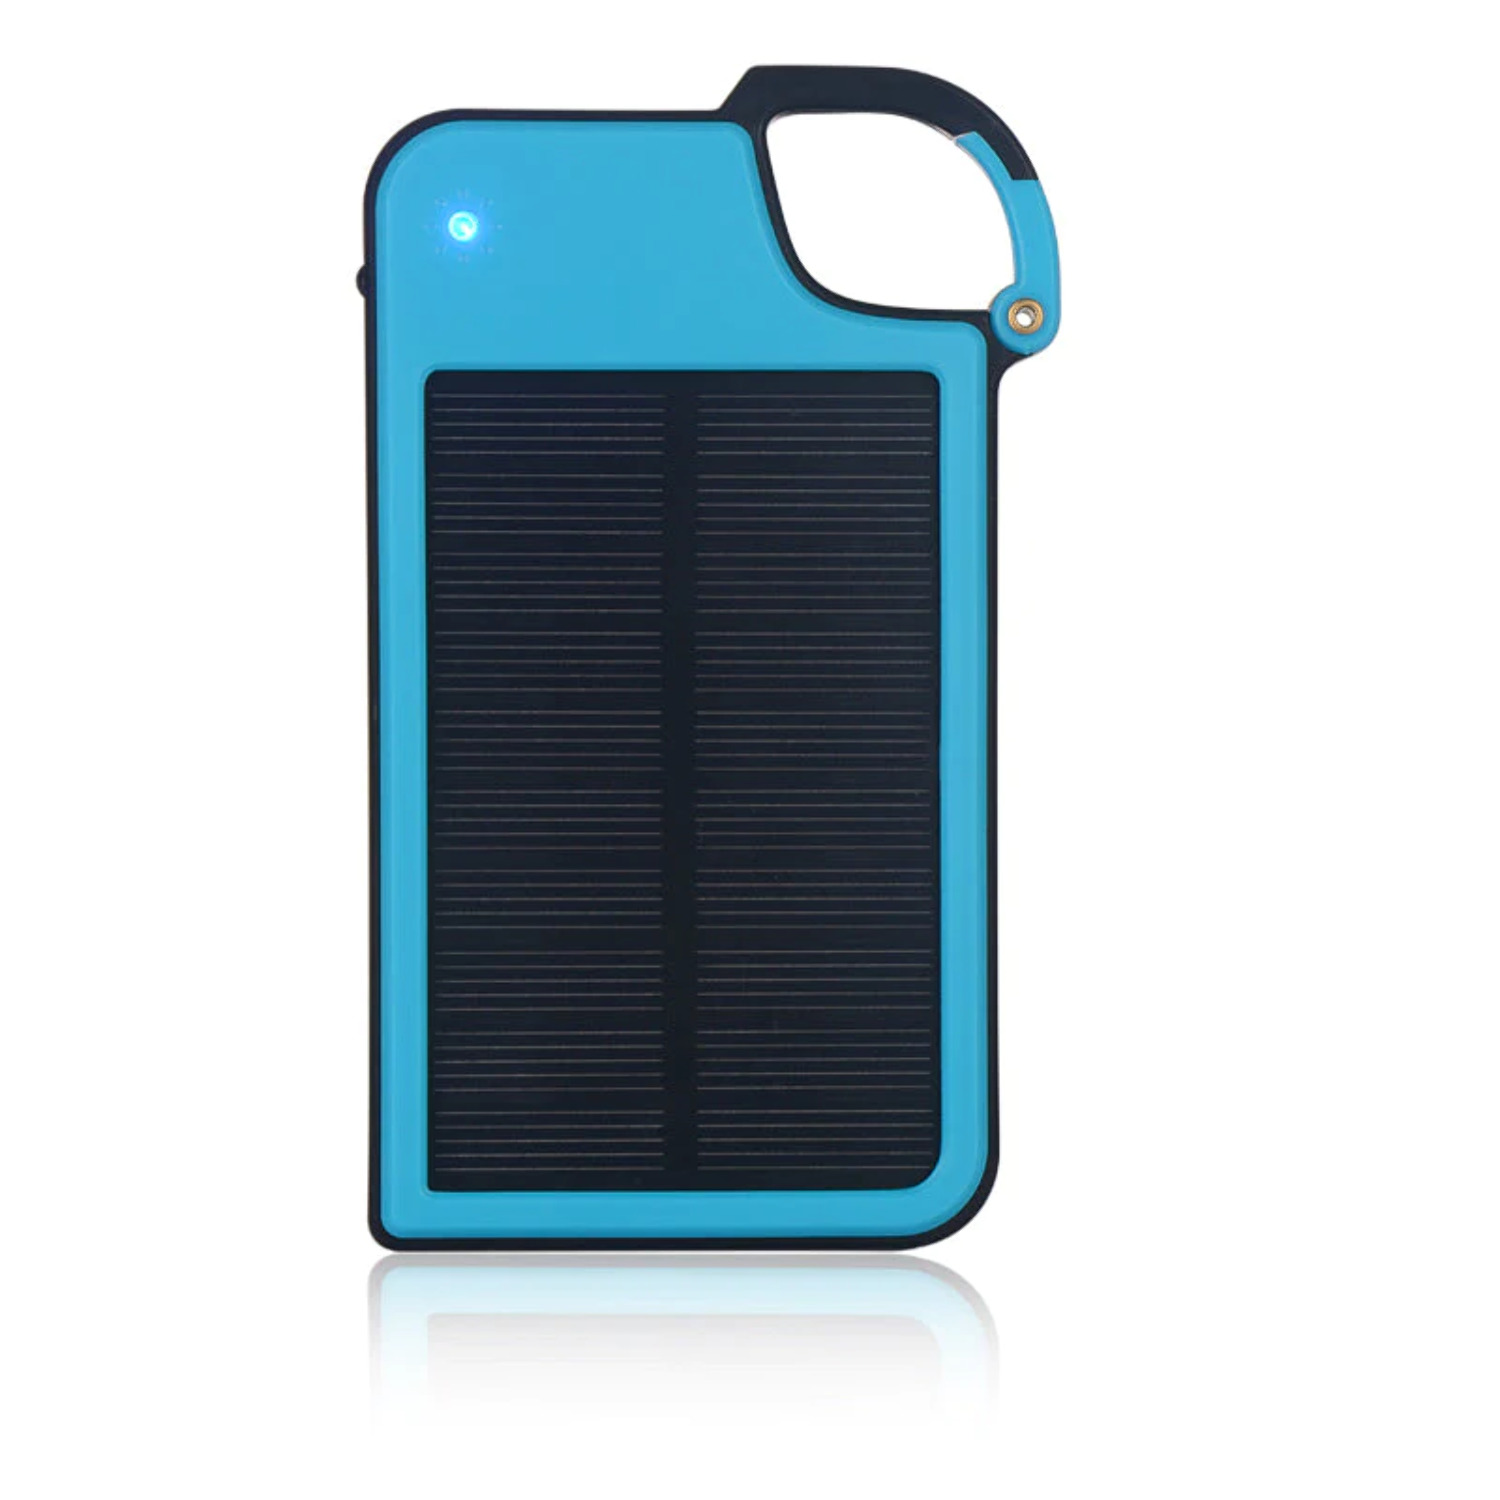 Clip-on Tag Along Solar Charger and 4050 mAh PowerBank For Your Smartphone - image 1 of 6